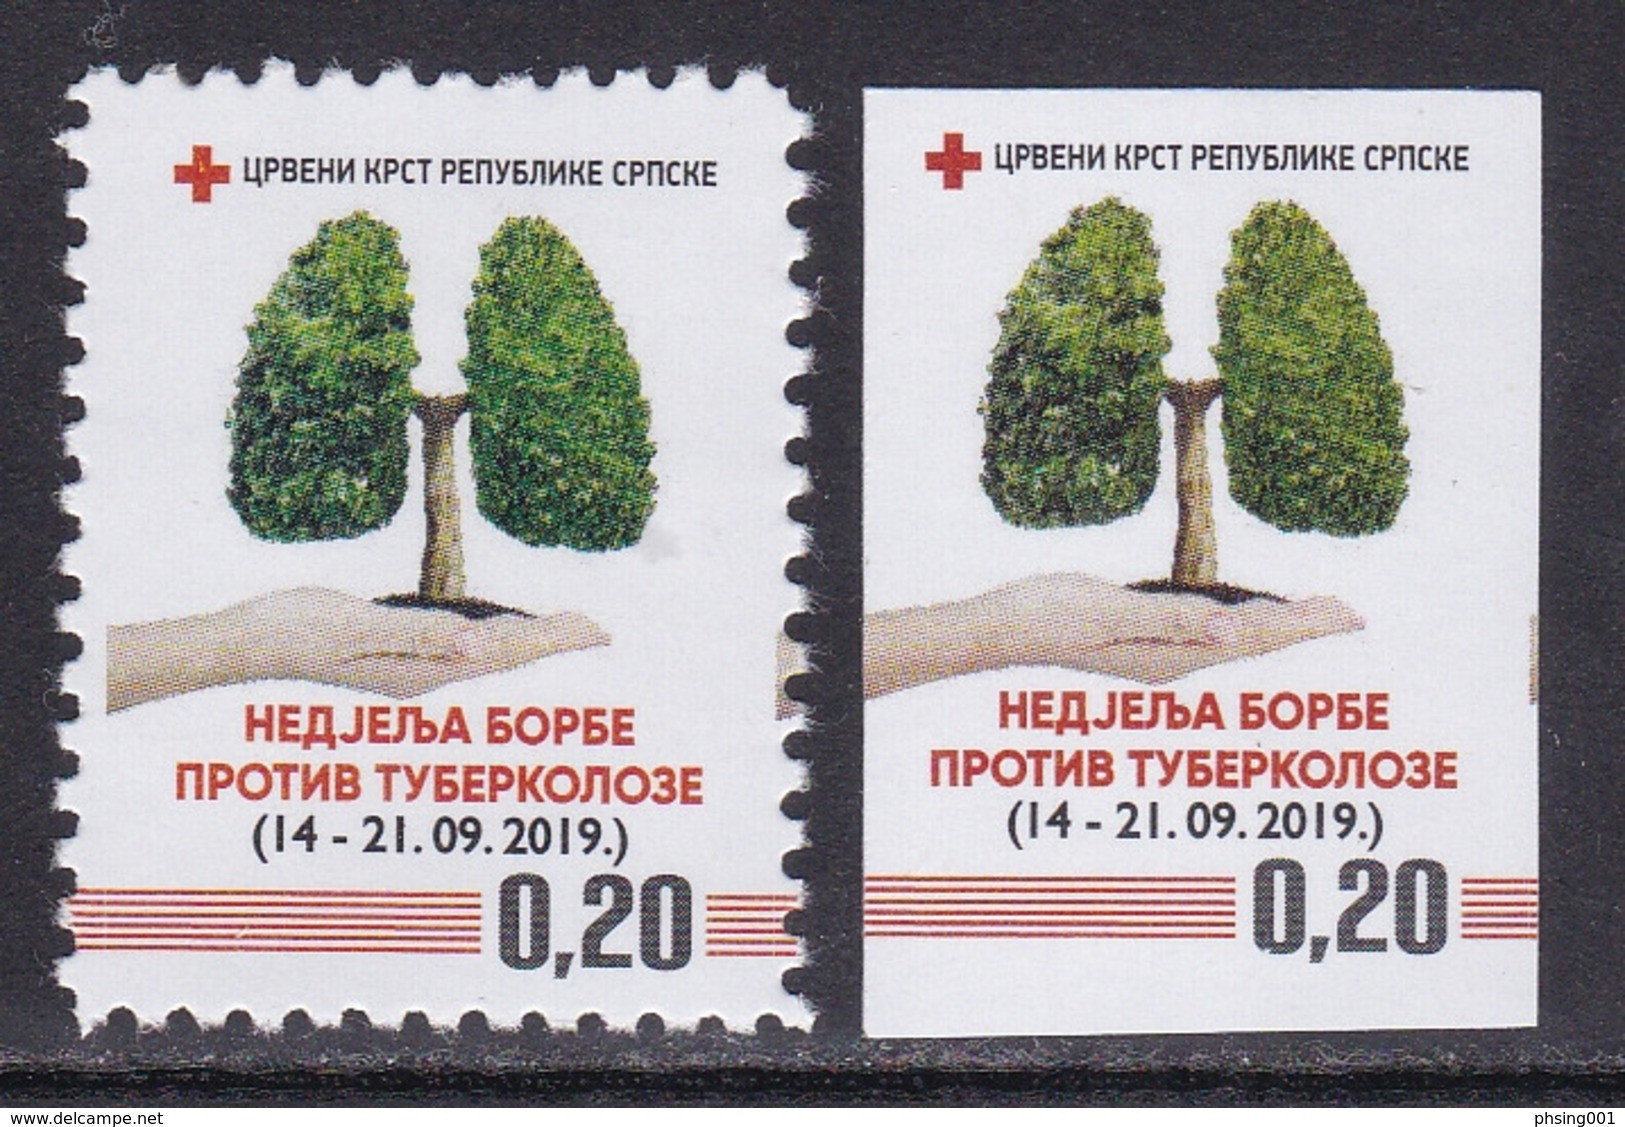 Bosnia Serbia 2019 TBC Red Cross Tax Charity Surcharge, Perforated + Imperforated Stamp MNH - Cruz Roja